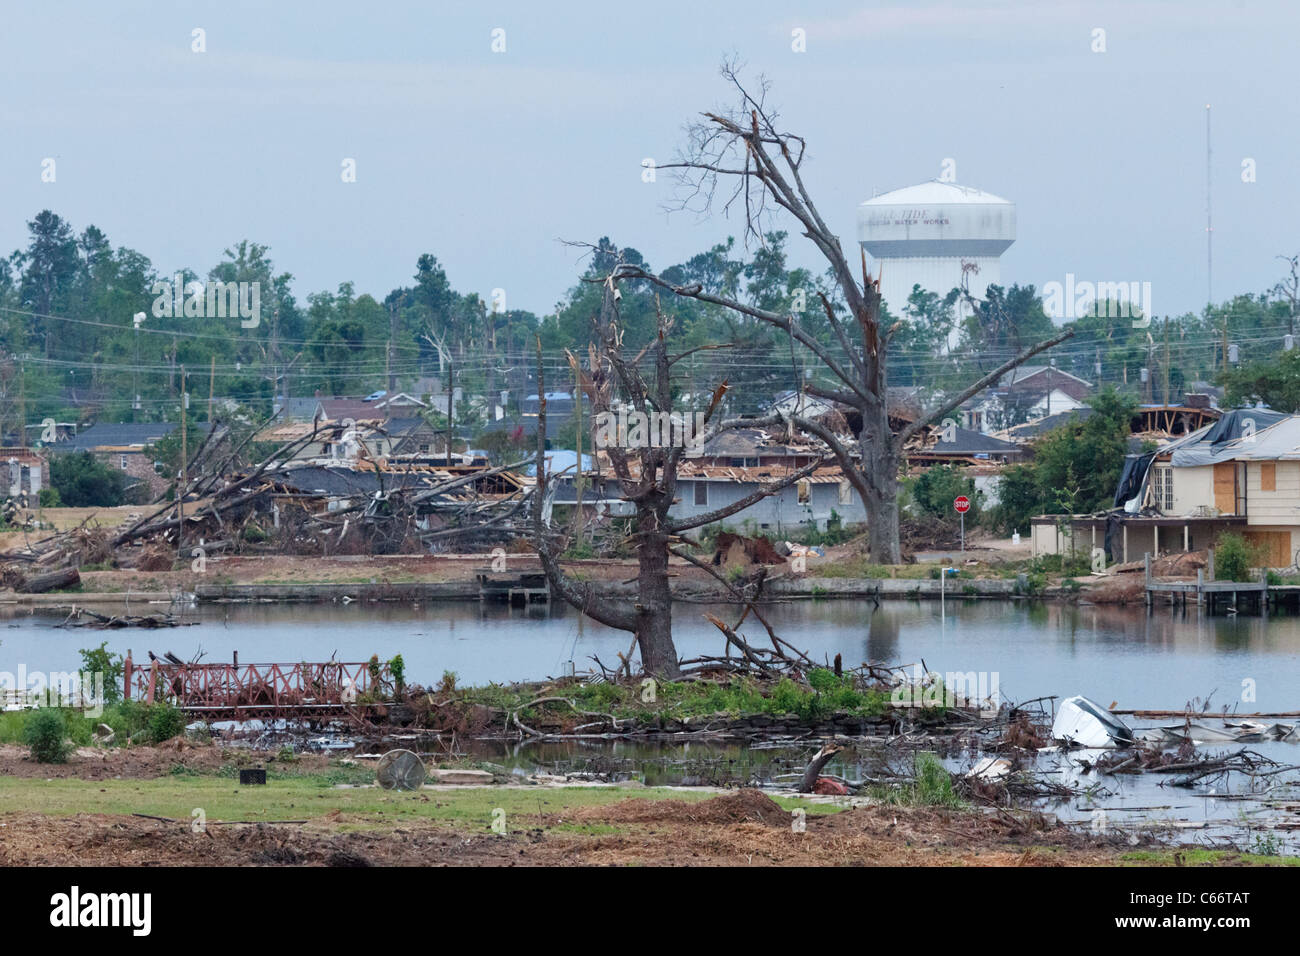 Part of the damage from the April 27, 2011 Tuscaloosa, Alabama tornado damage as viewed 6 weeks later on June 16. Stock Photo